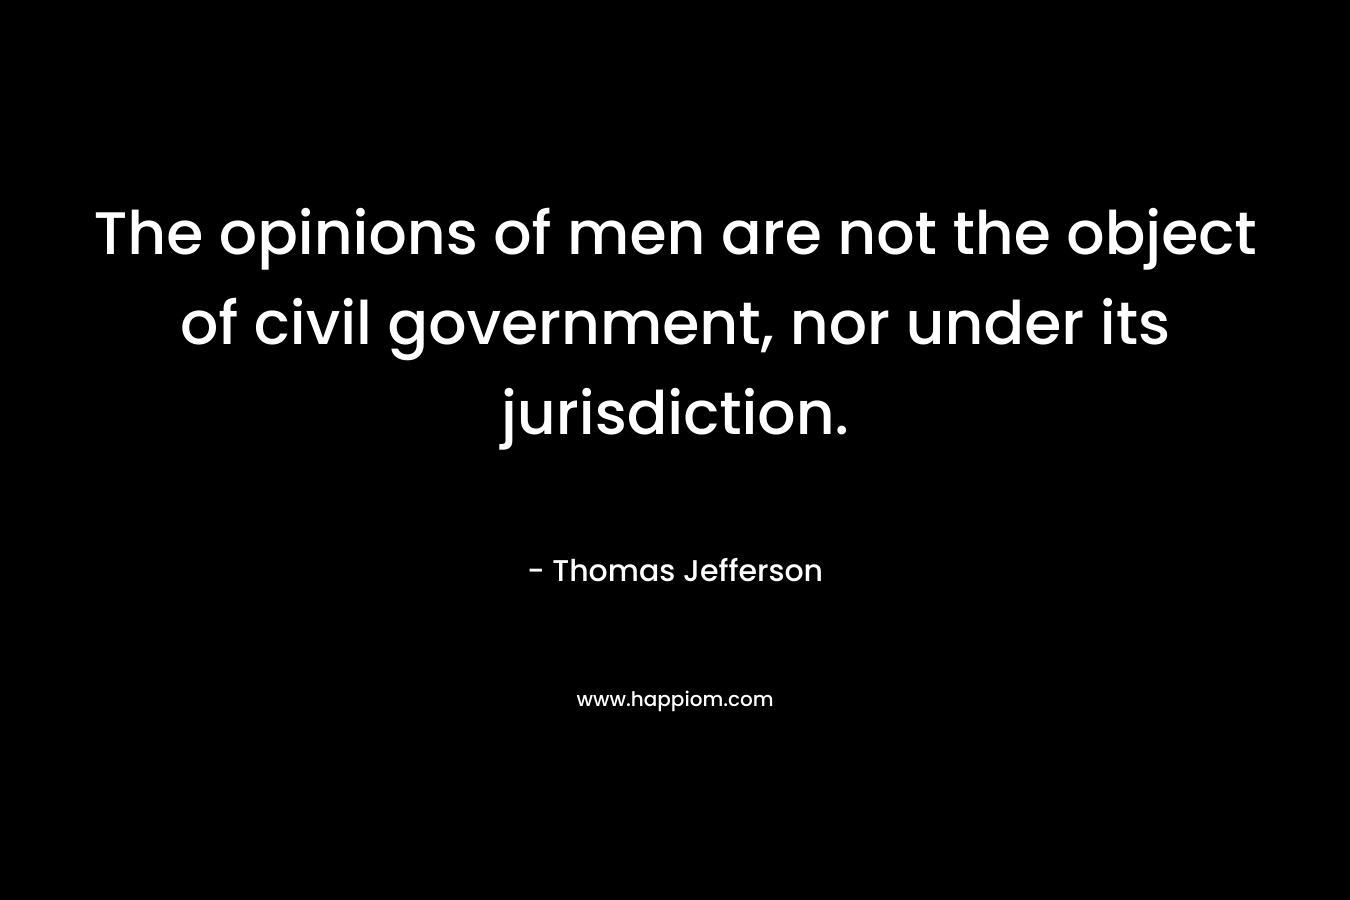 The opinions of men are not the object of civil government, nor under its jurisdiction.